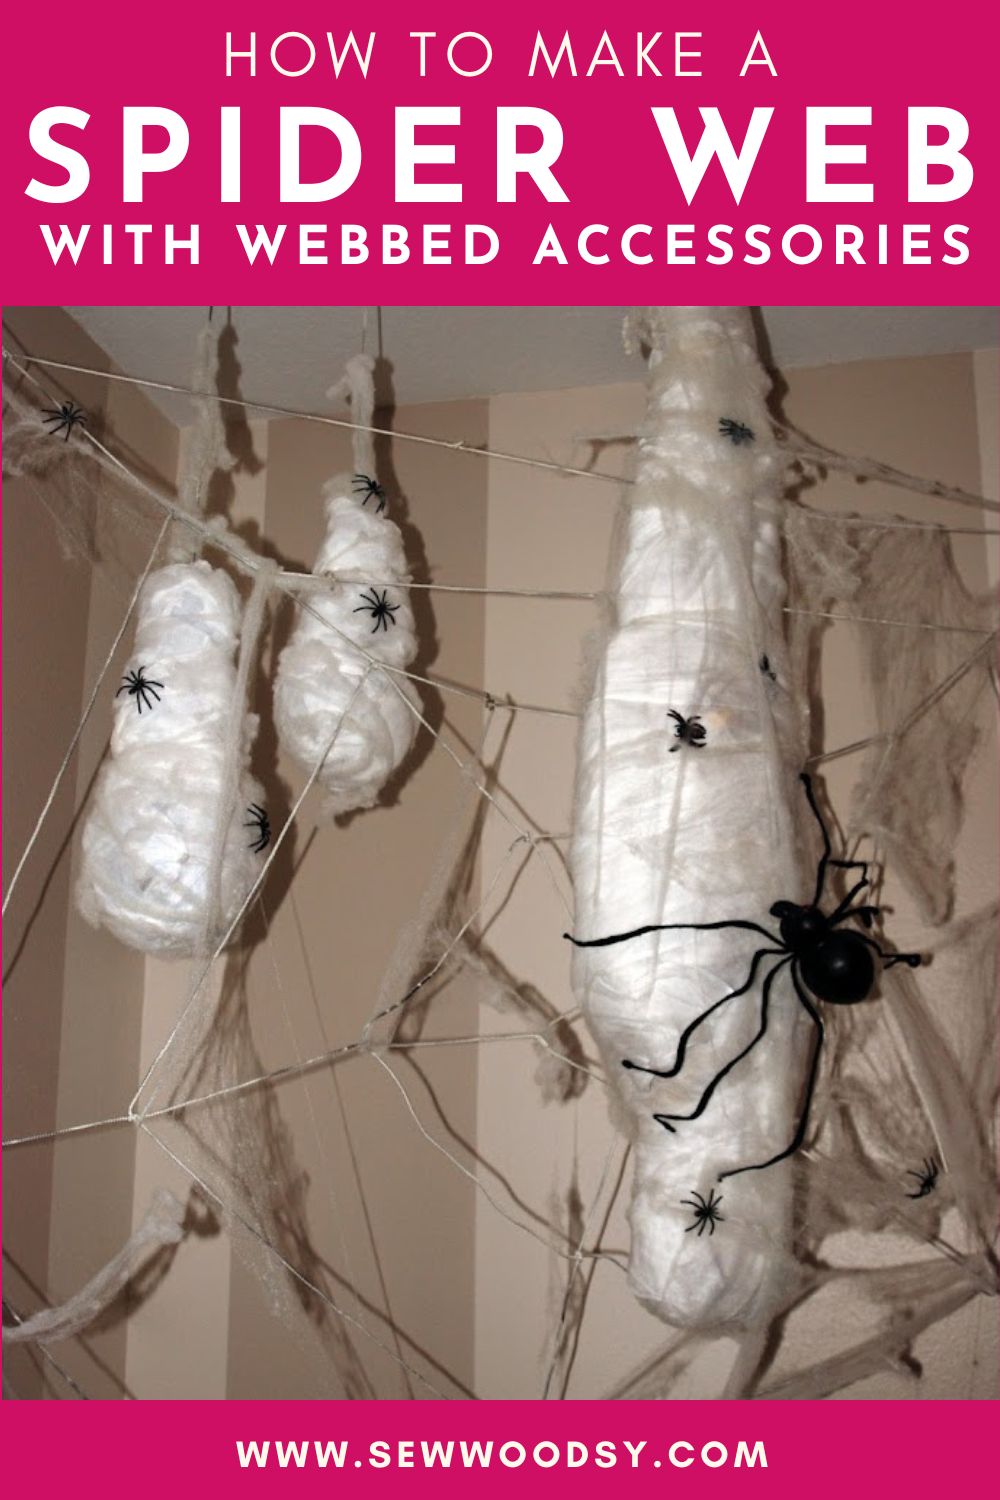 Spider web with webbed person and sacks with text on image for Pinterest.